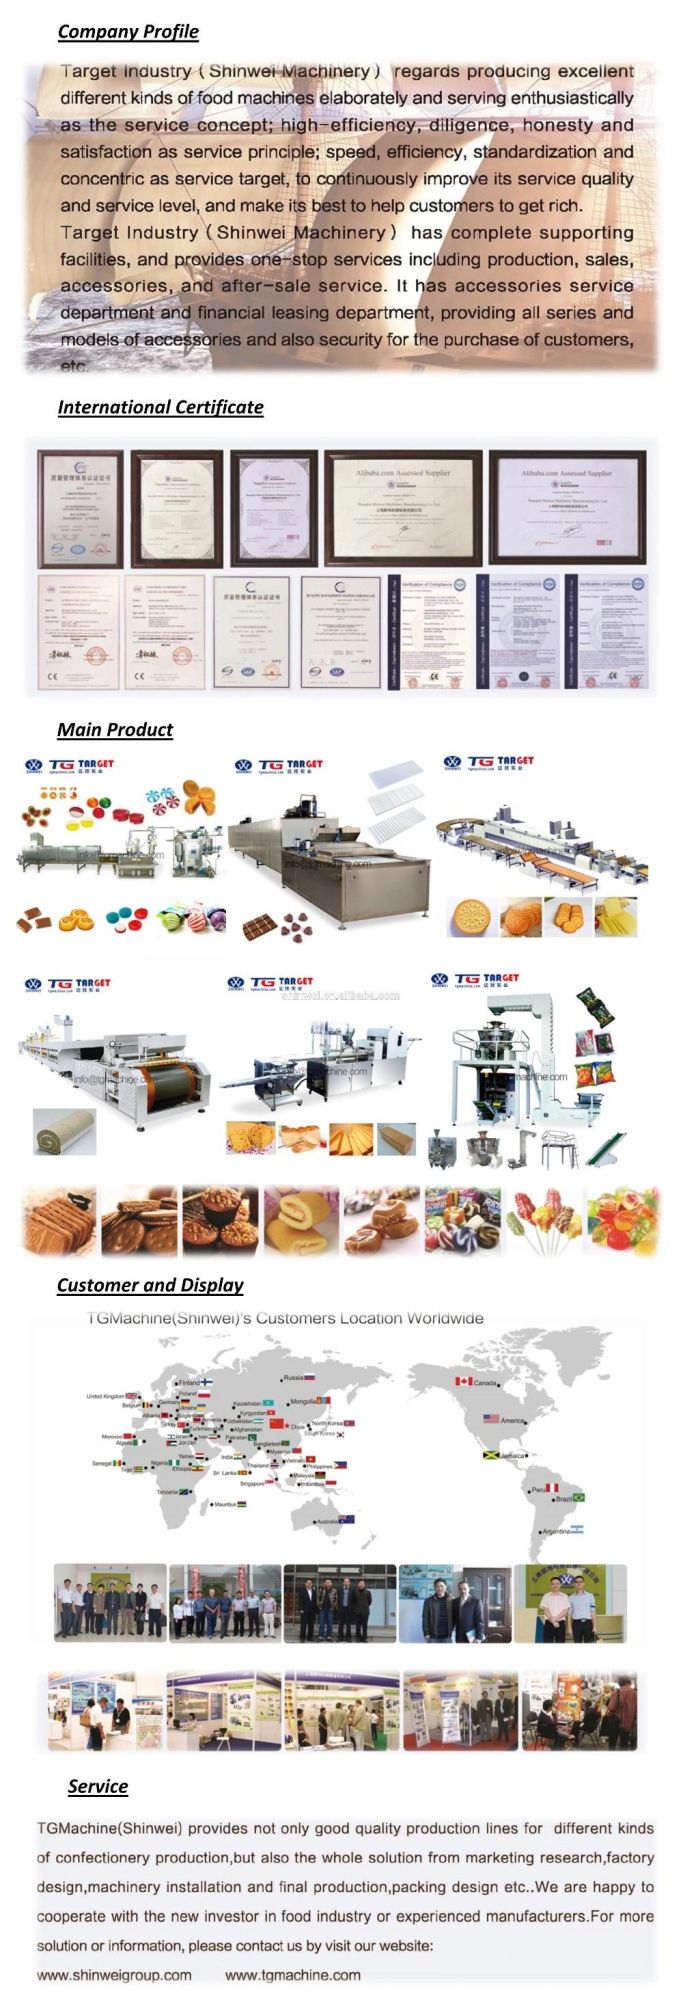 Price Chewing Gum Manufacturing Machine Bubble Gum Product Line